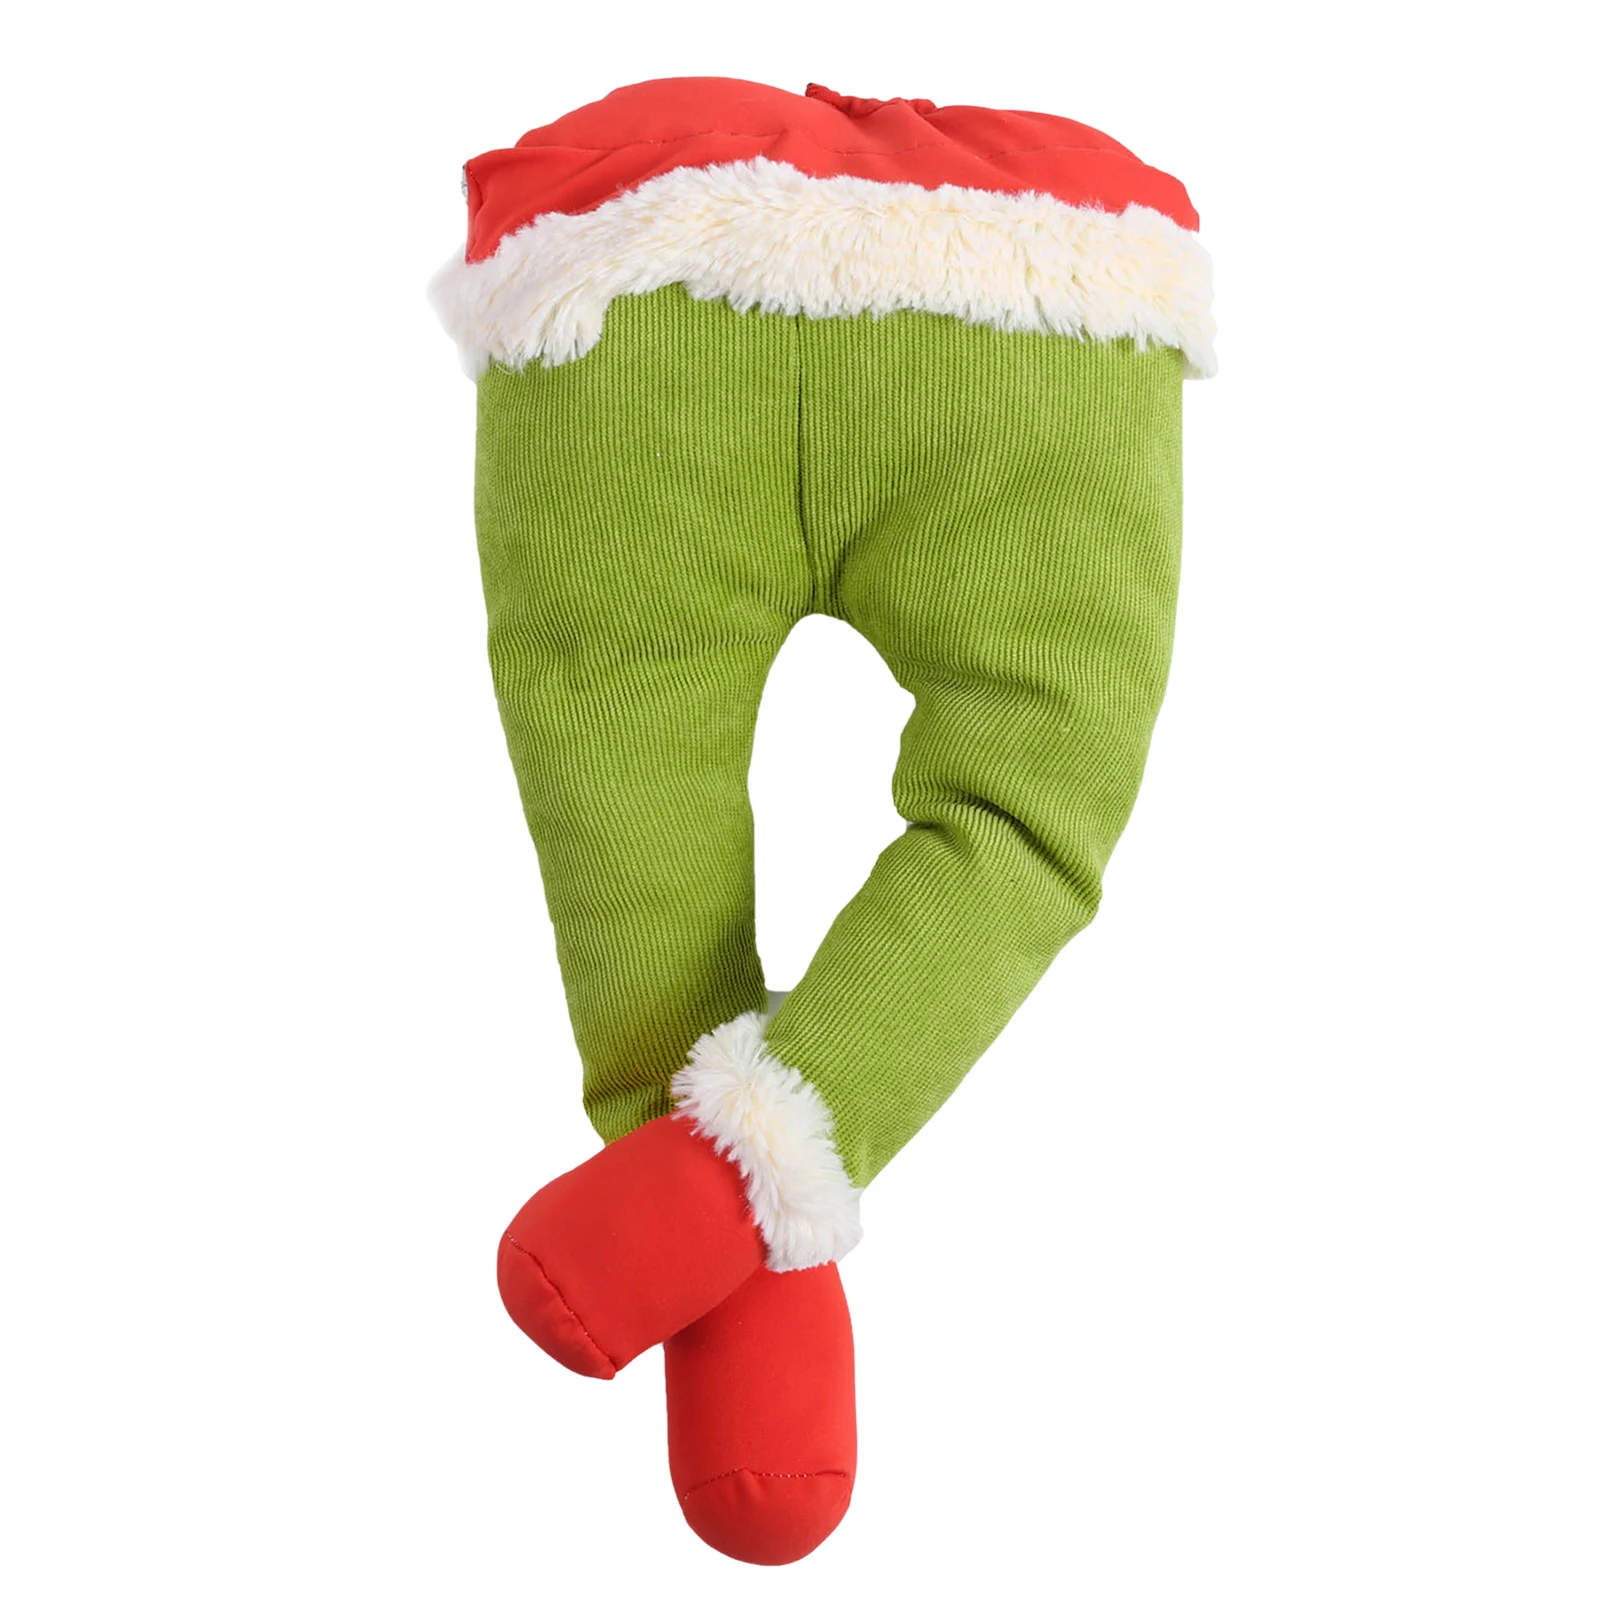 Christmas Tree Ornament How The Grinches Stole Christmas Stuffed Elf Legs Stuck In Christmas Burlap Wreath Door Home Decorations